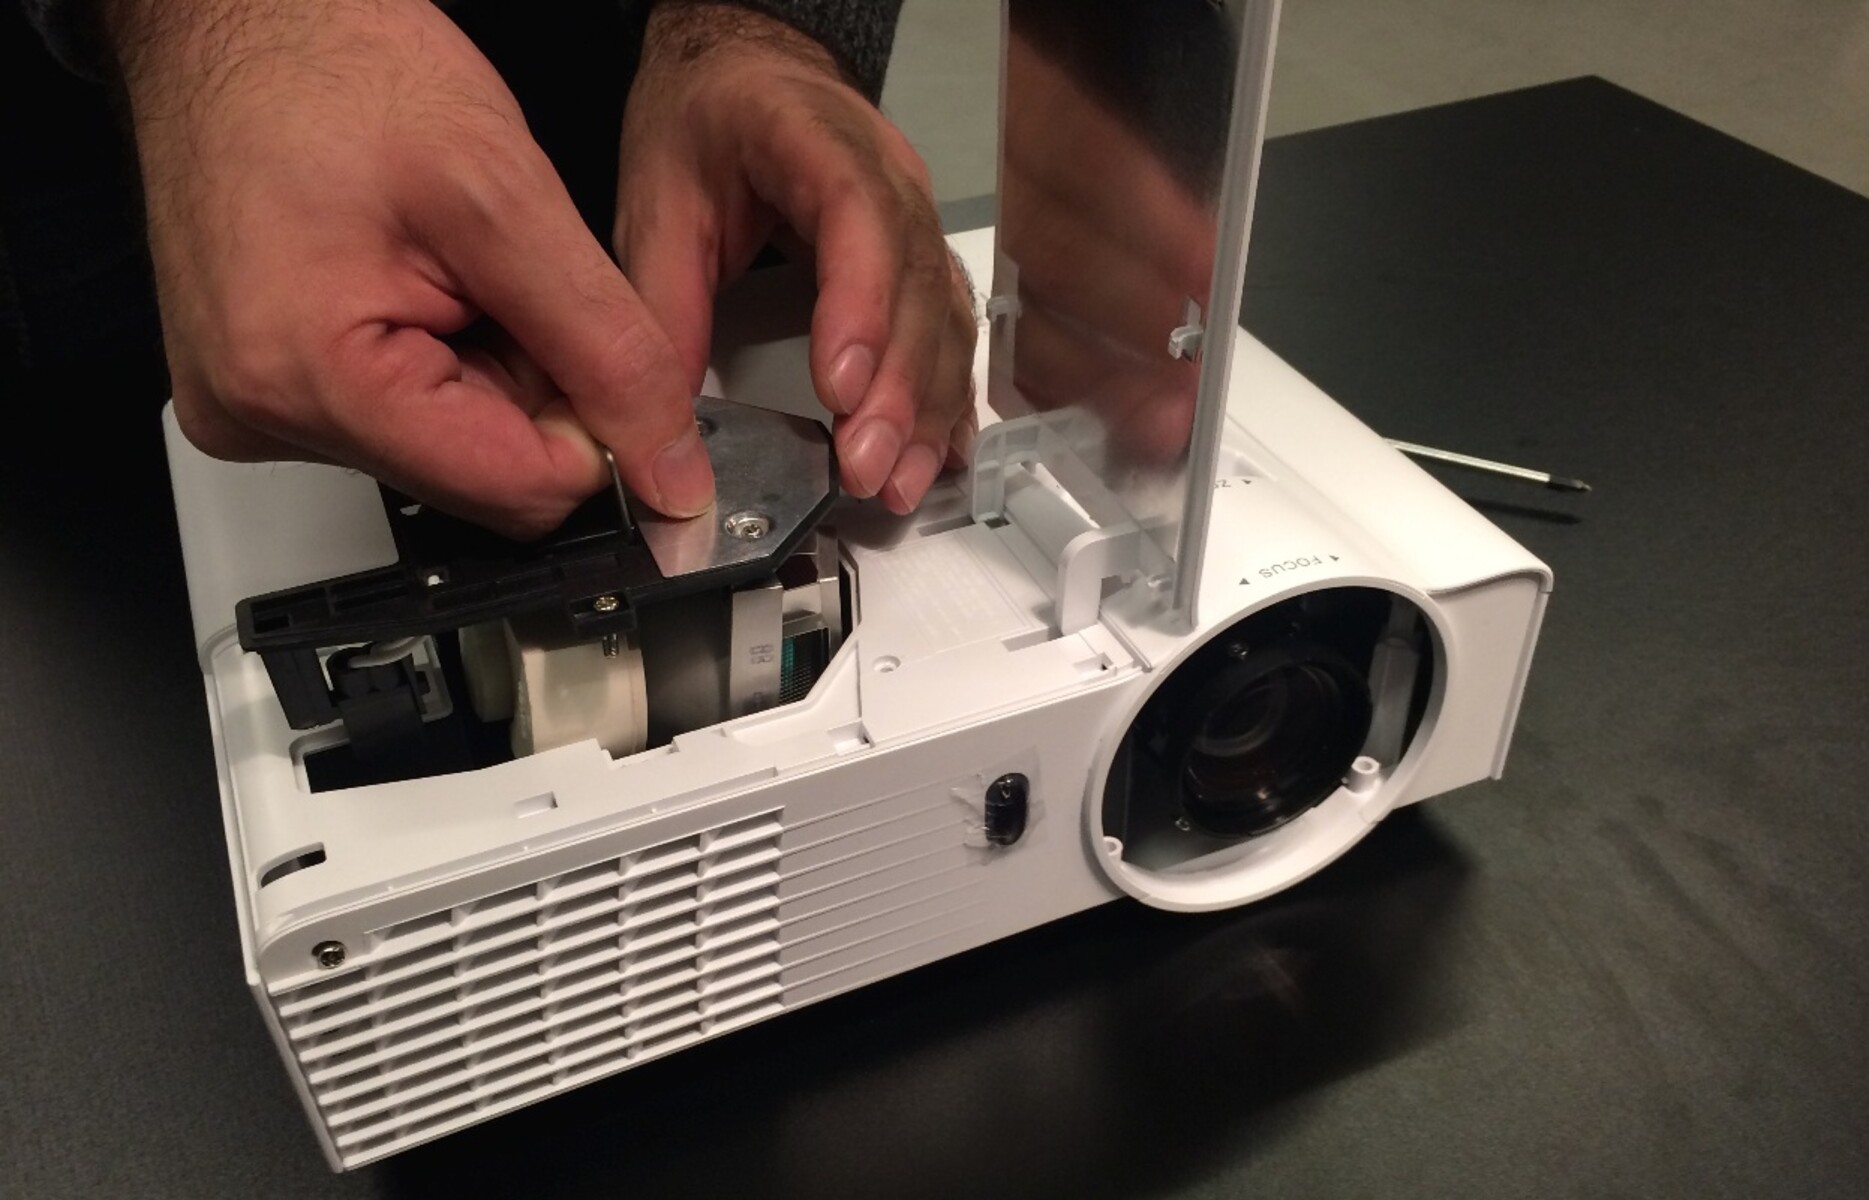 How To Change A Bulb In A Projector